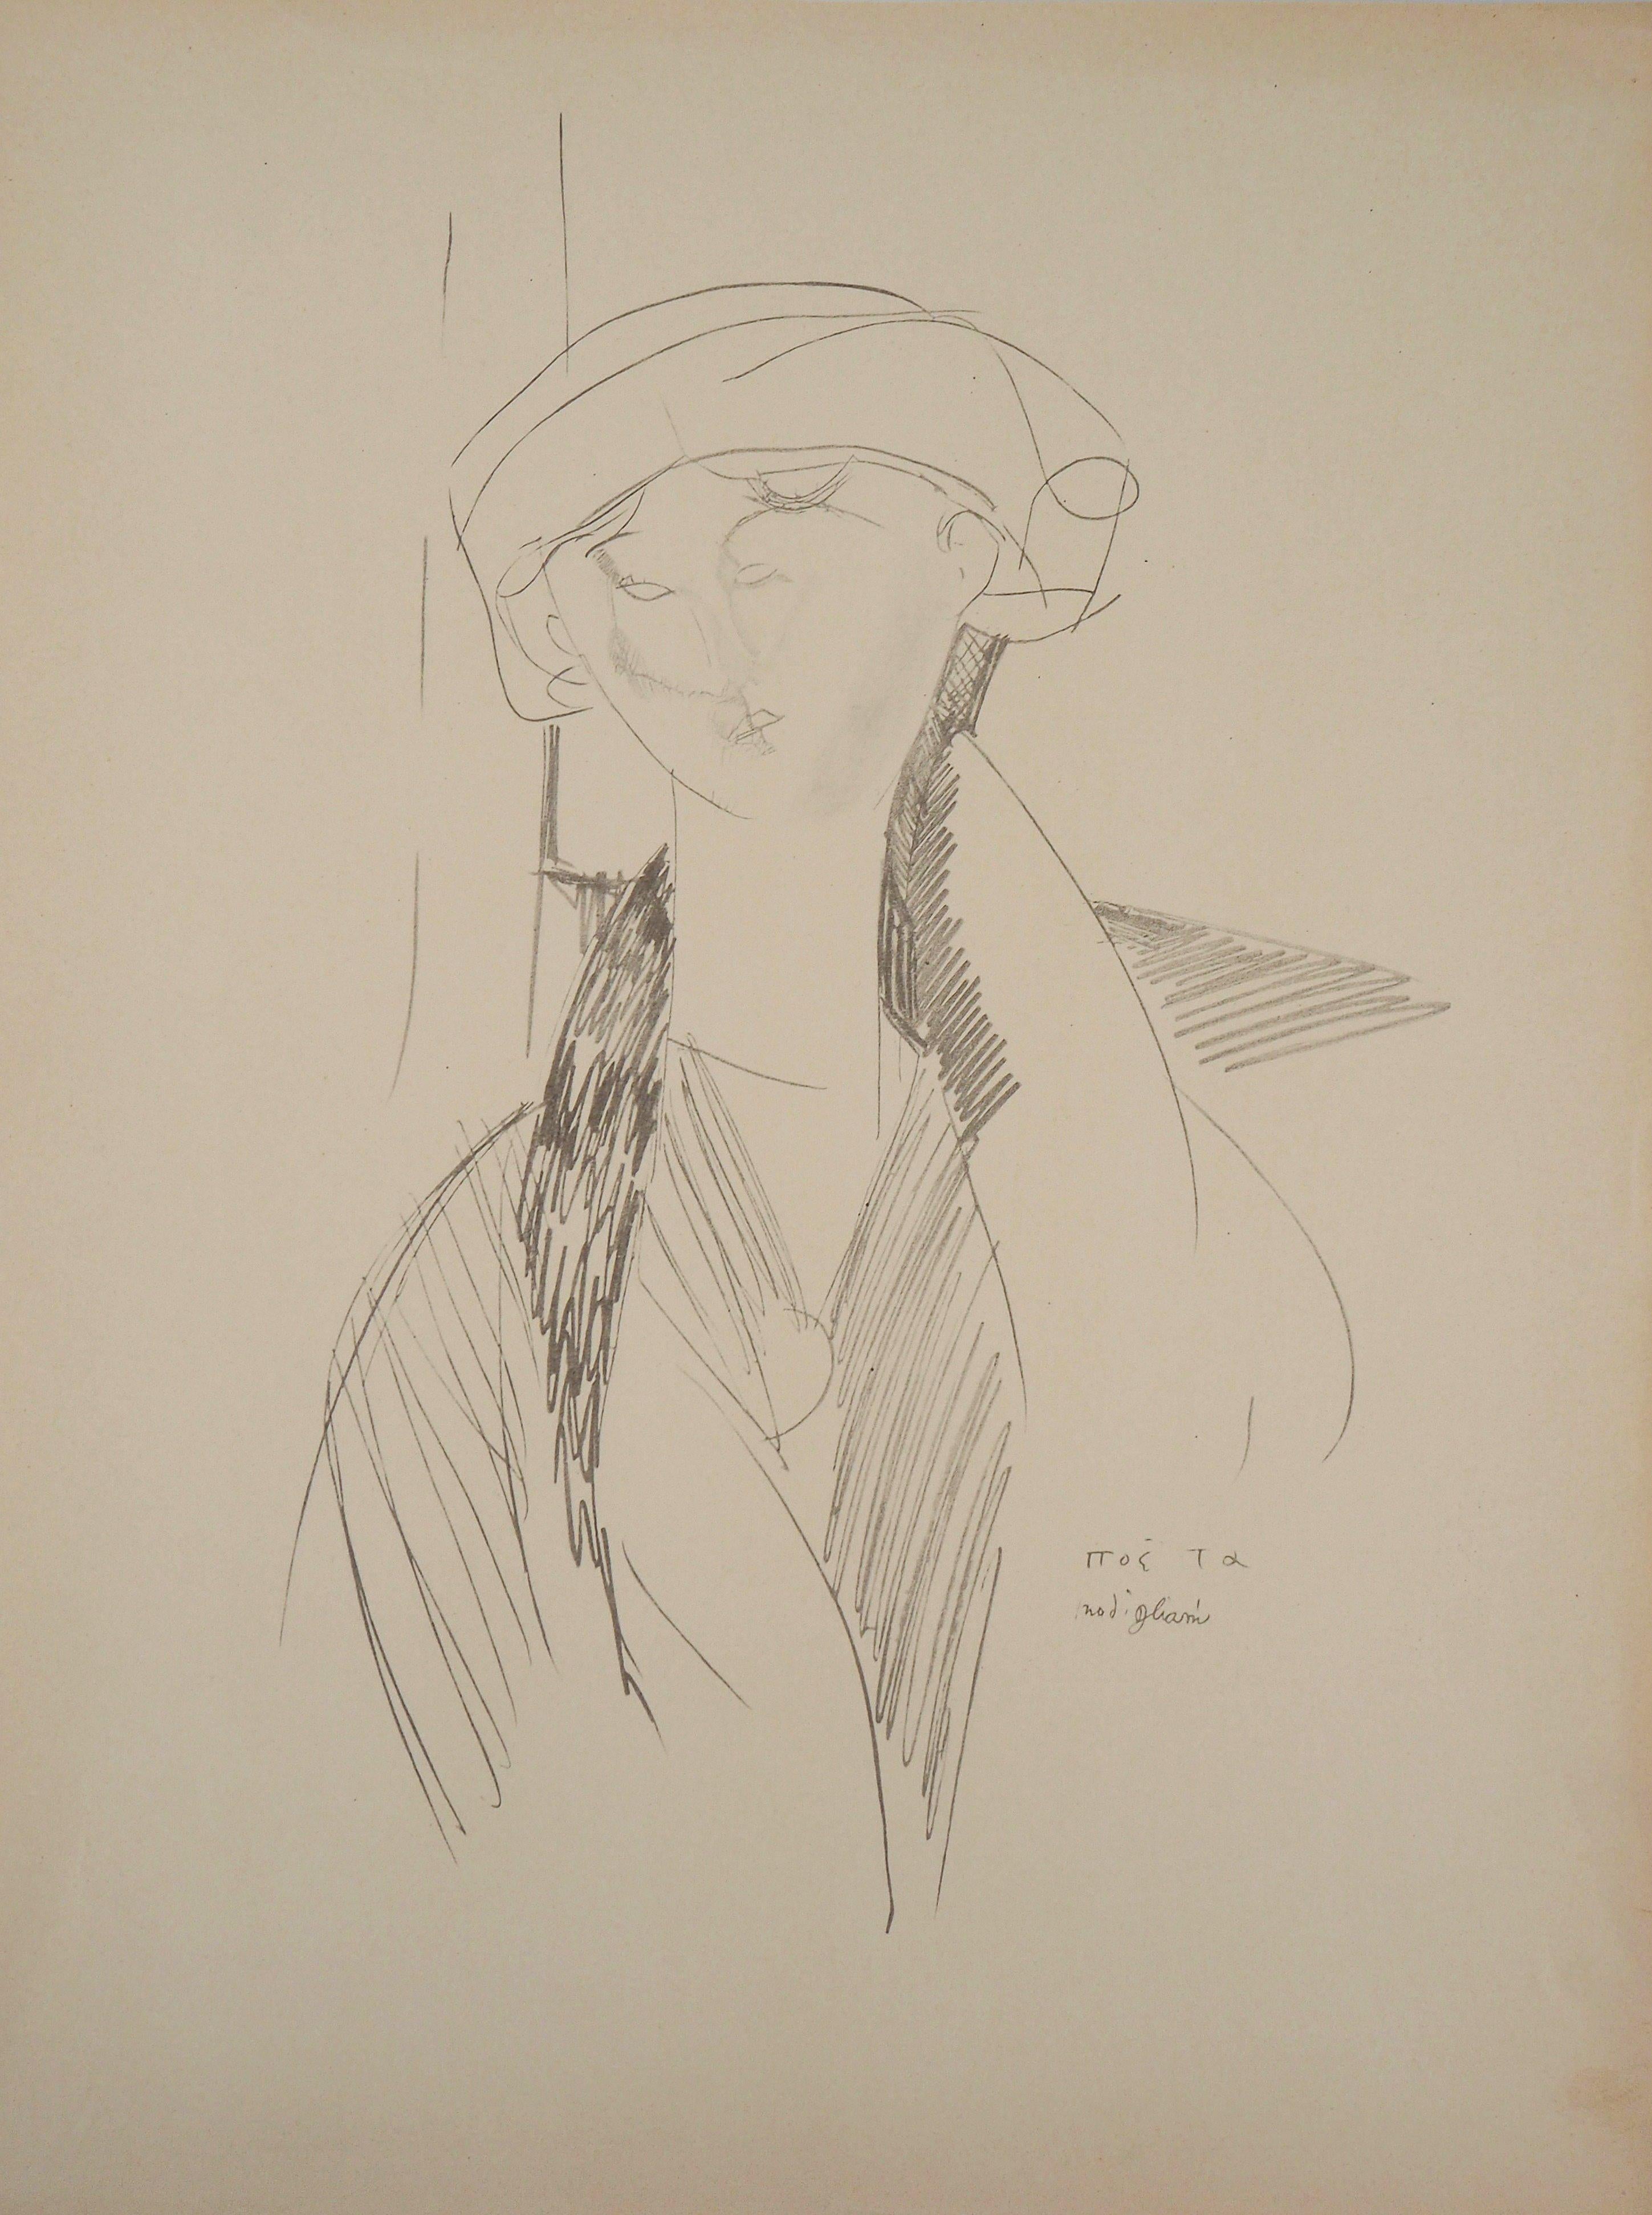 Amedeo Modigliani Portrait Print - The Poet, Young Woman - Lithograph signed in the plate (Leda 1960)